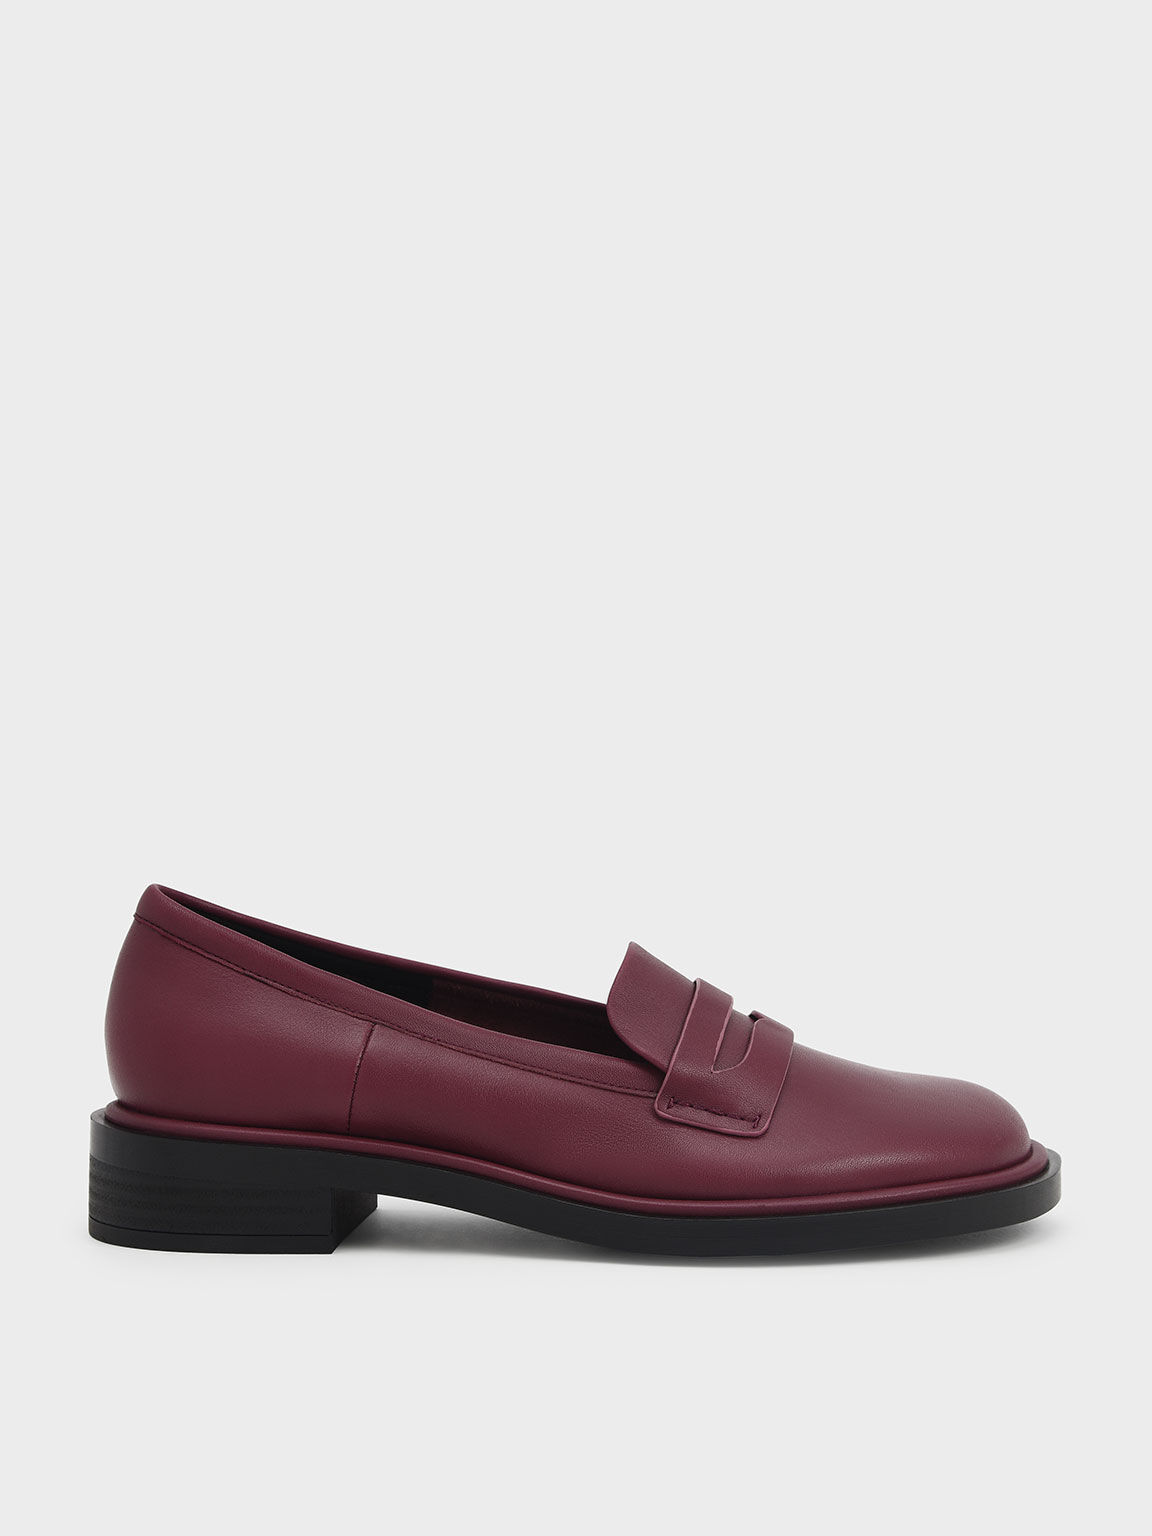 Rumi Leather Penny Loafers, Burgundy, hi-res